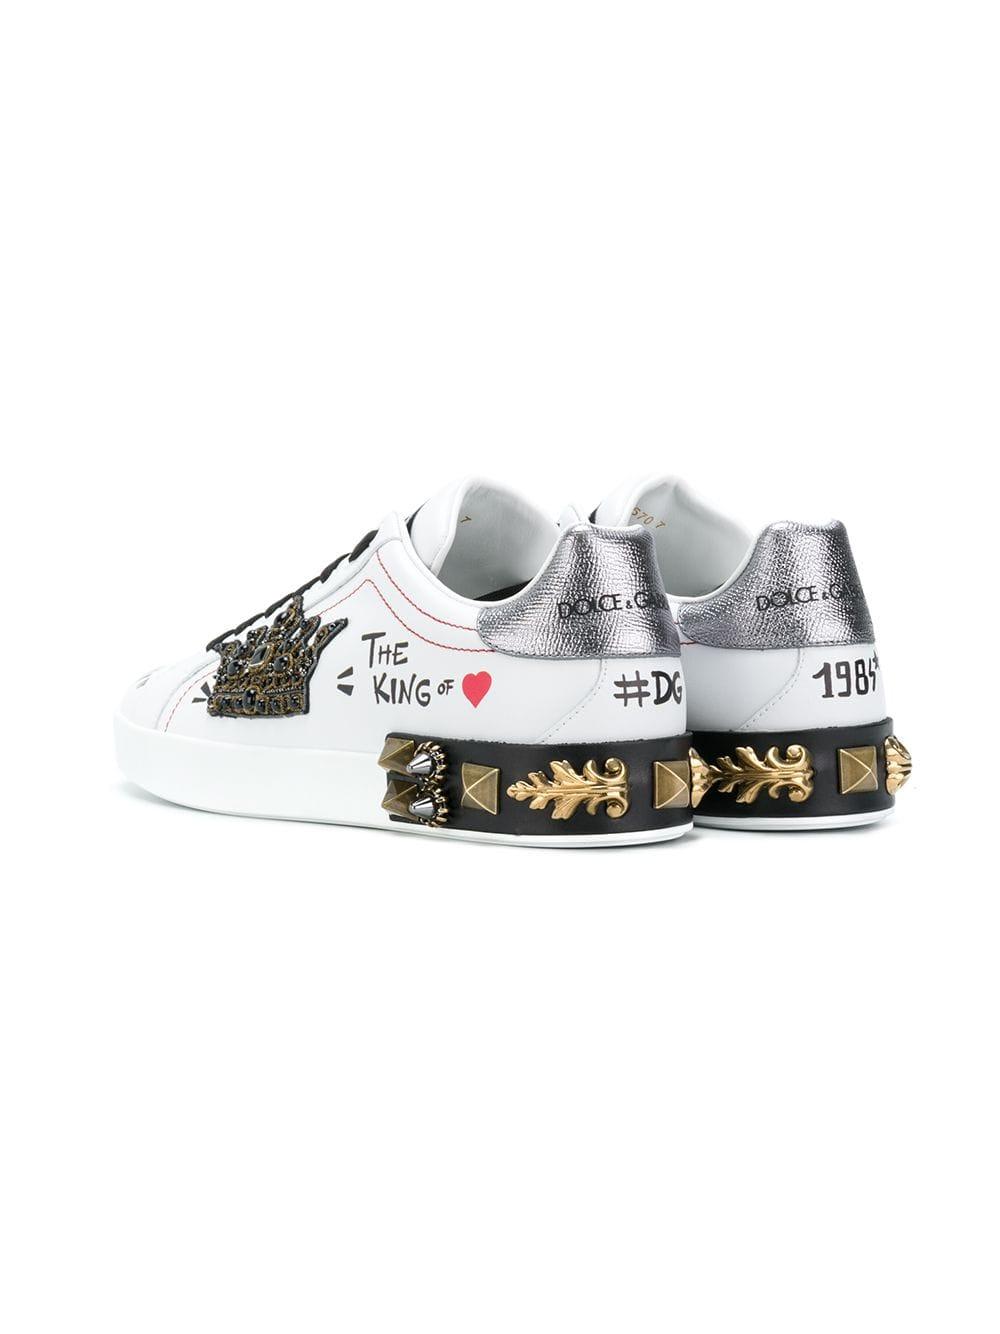 dolce and gabbana king trainers